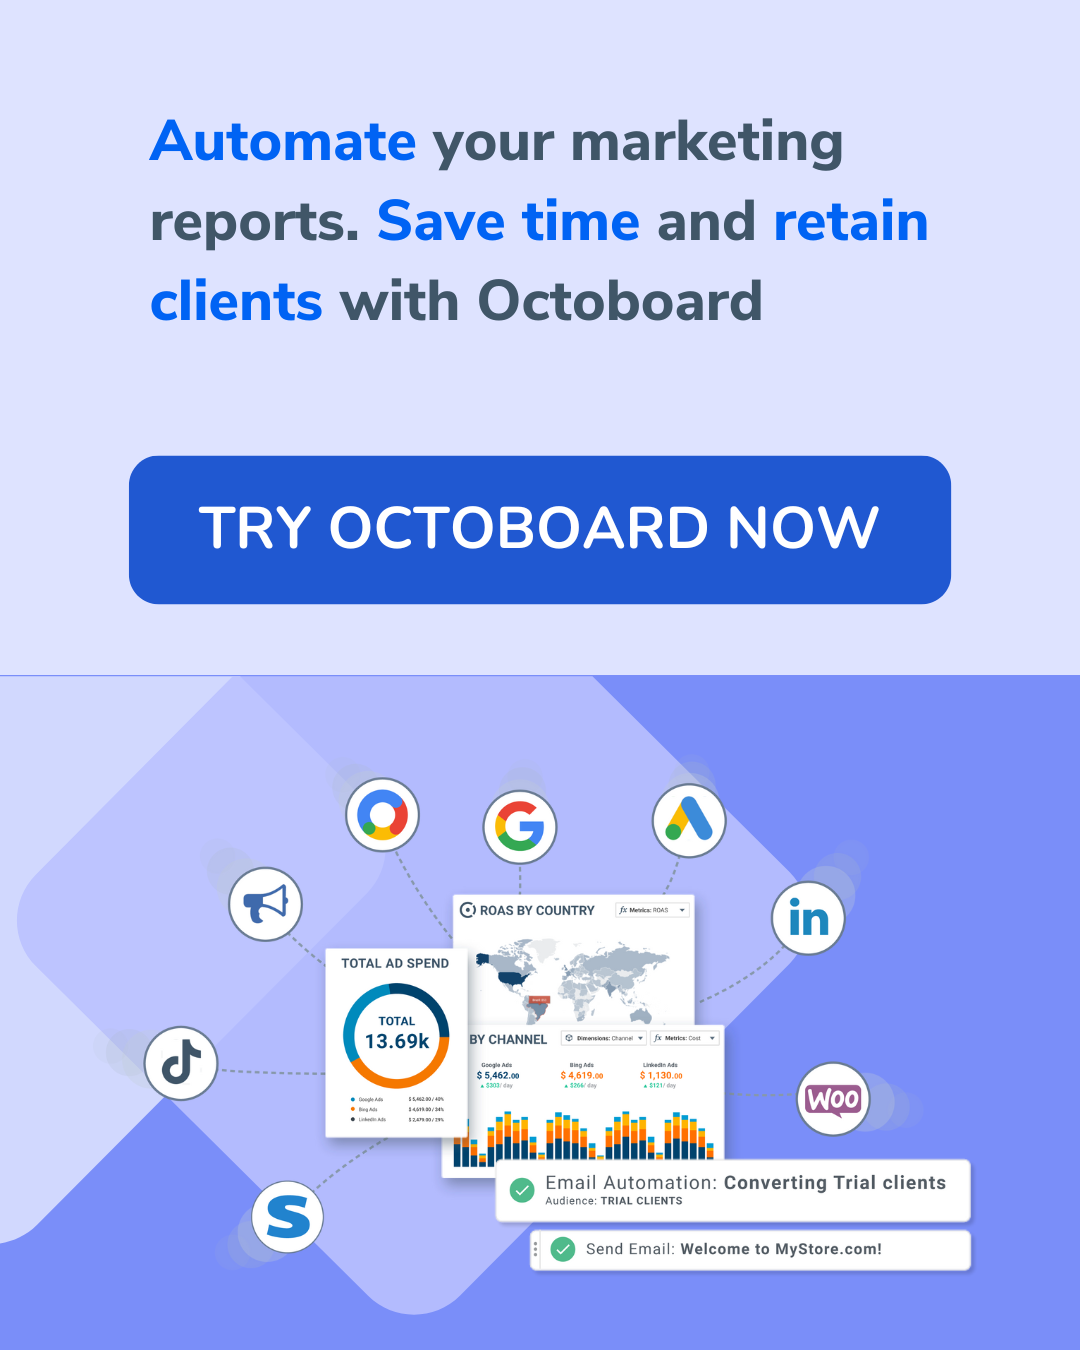 Automate all your marketing reports. Save time and retain clients with Octoboard.